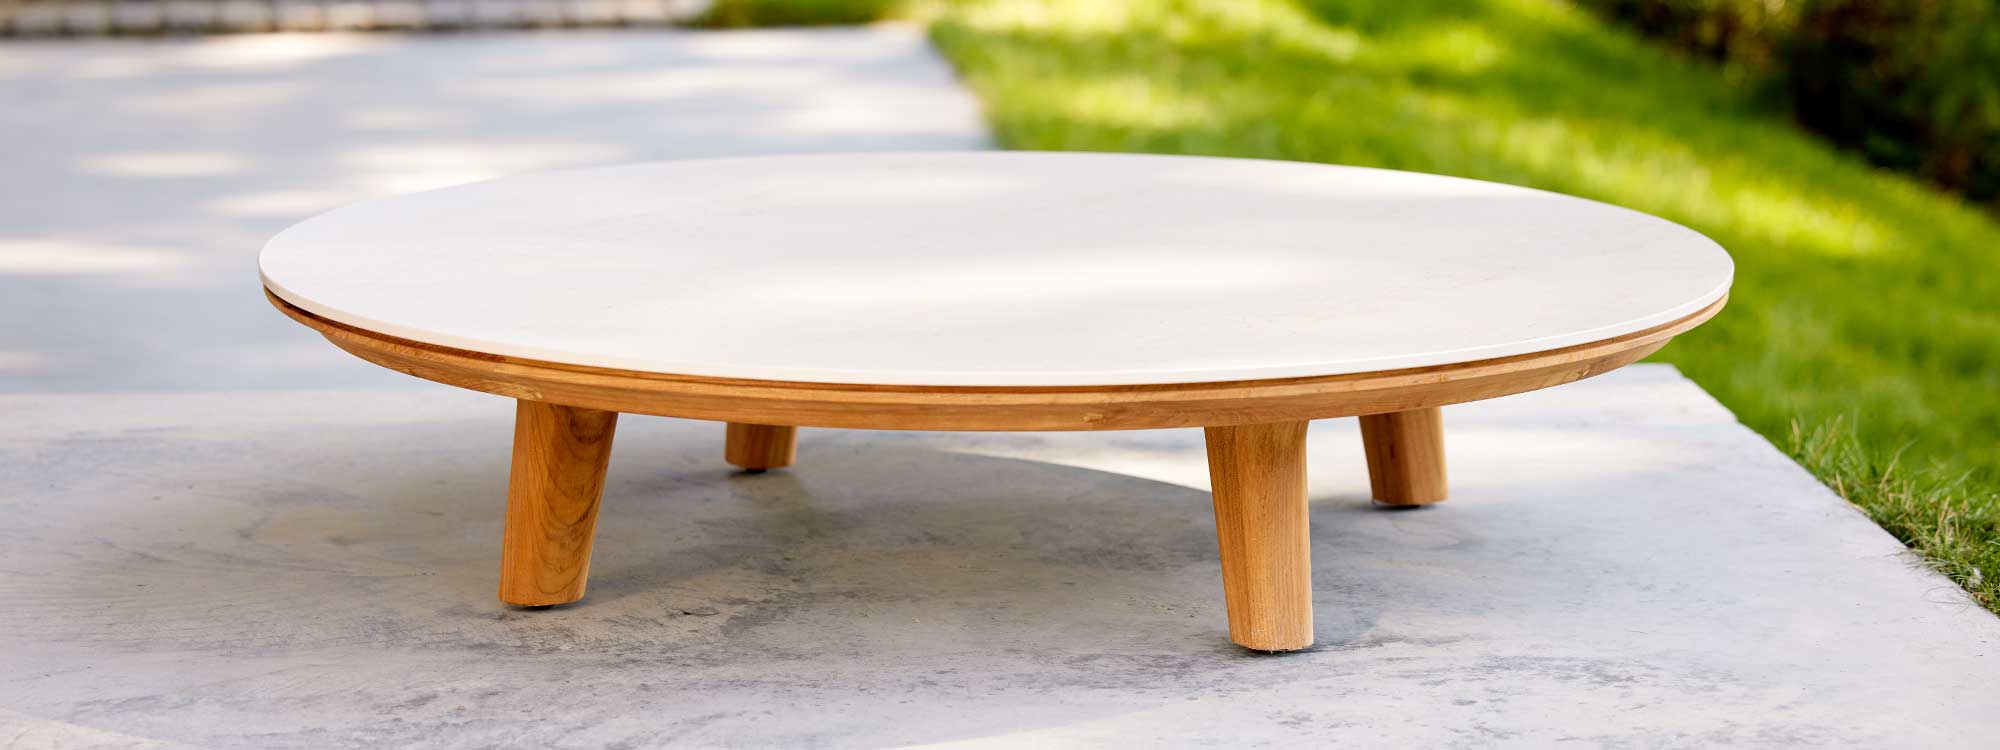 Image of Aspect large round coffee table with teak legs and Travertine ceramic top by Cane-line